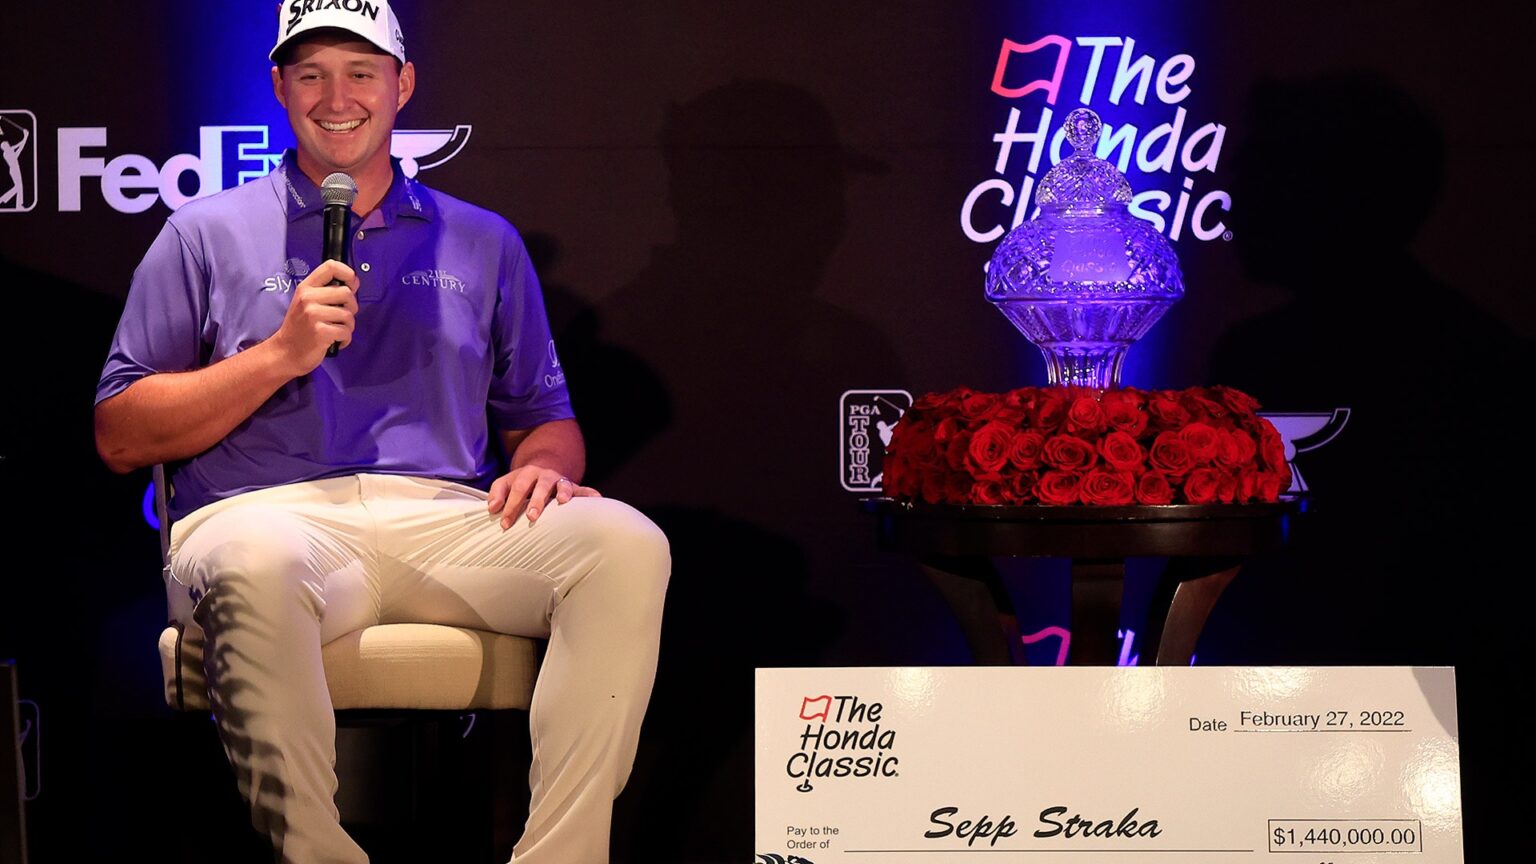 Honda Classic purse payout Sepp Straka earns more on Sunday than in